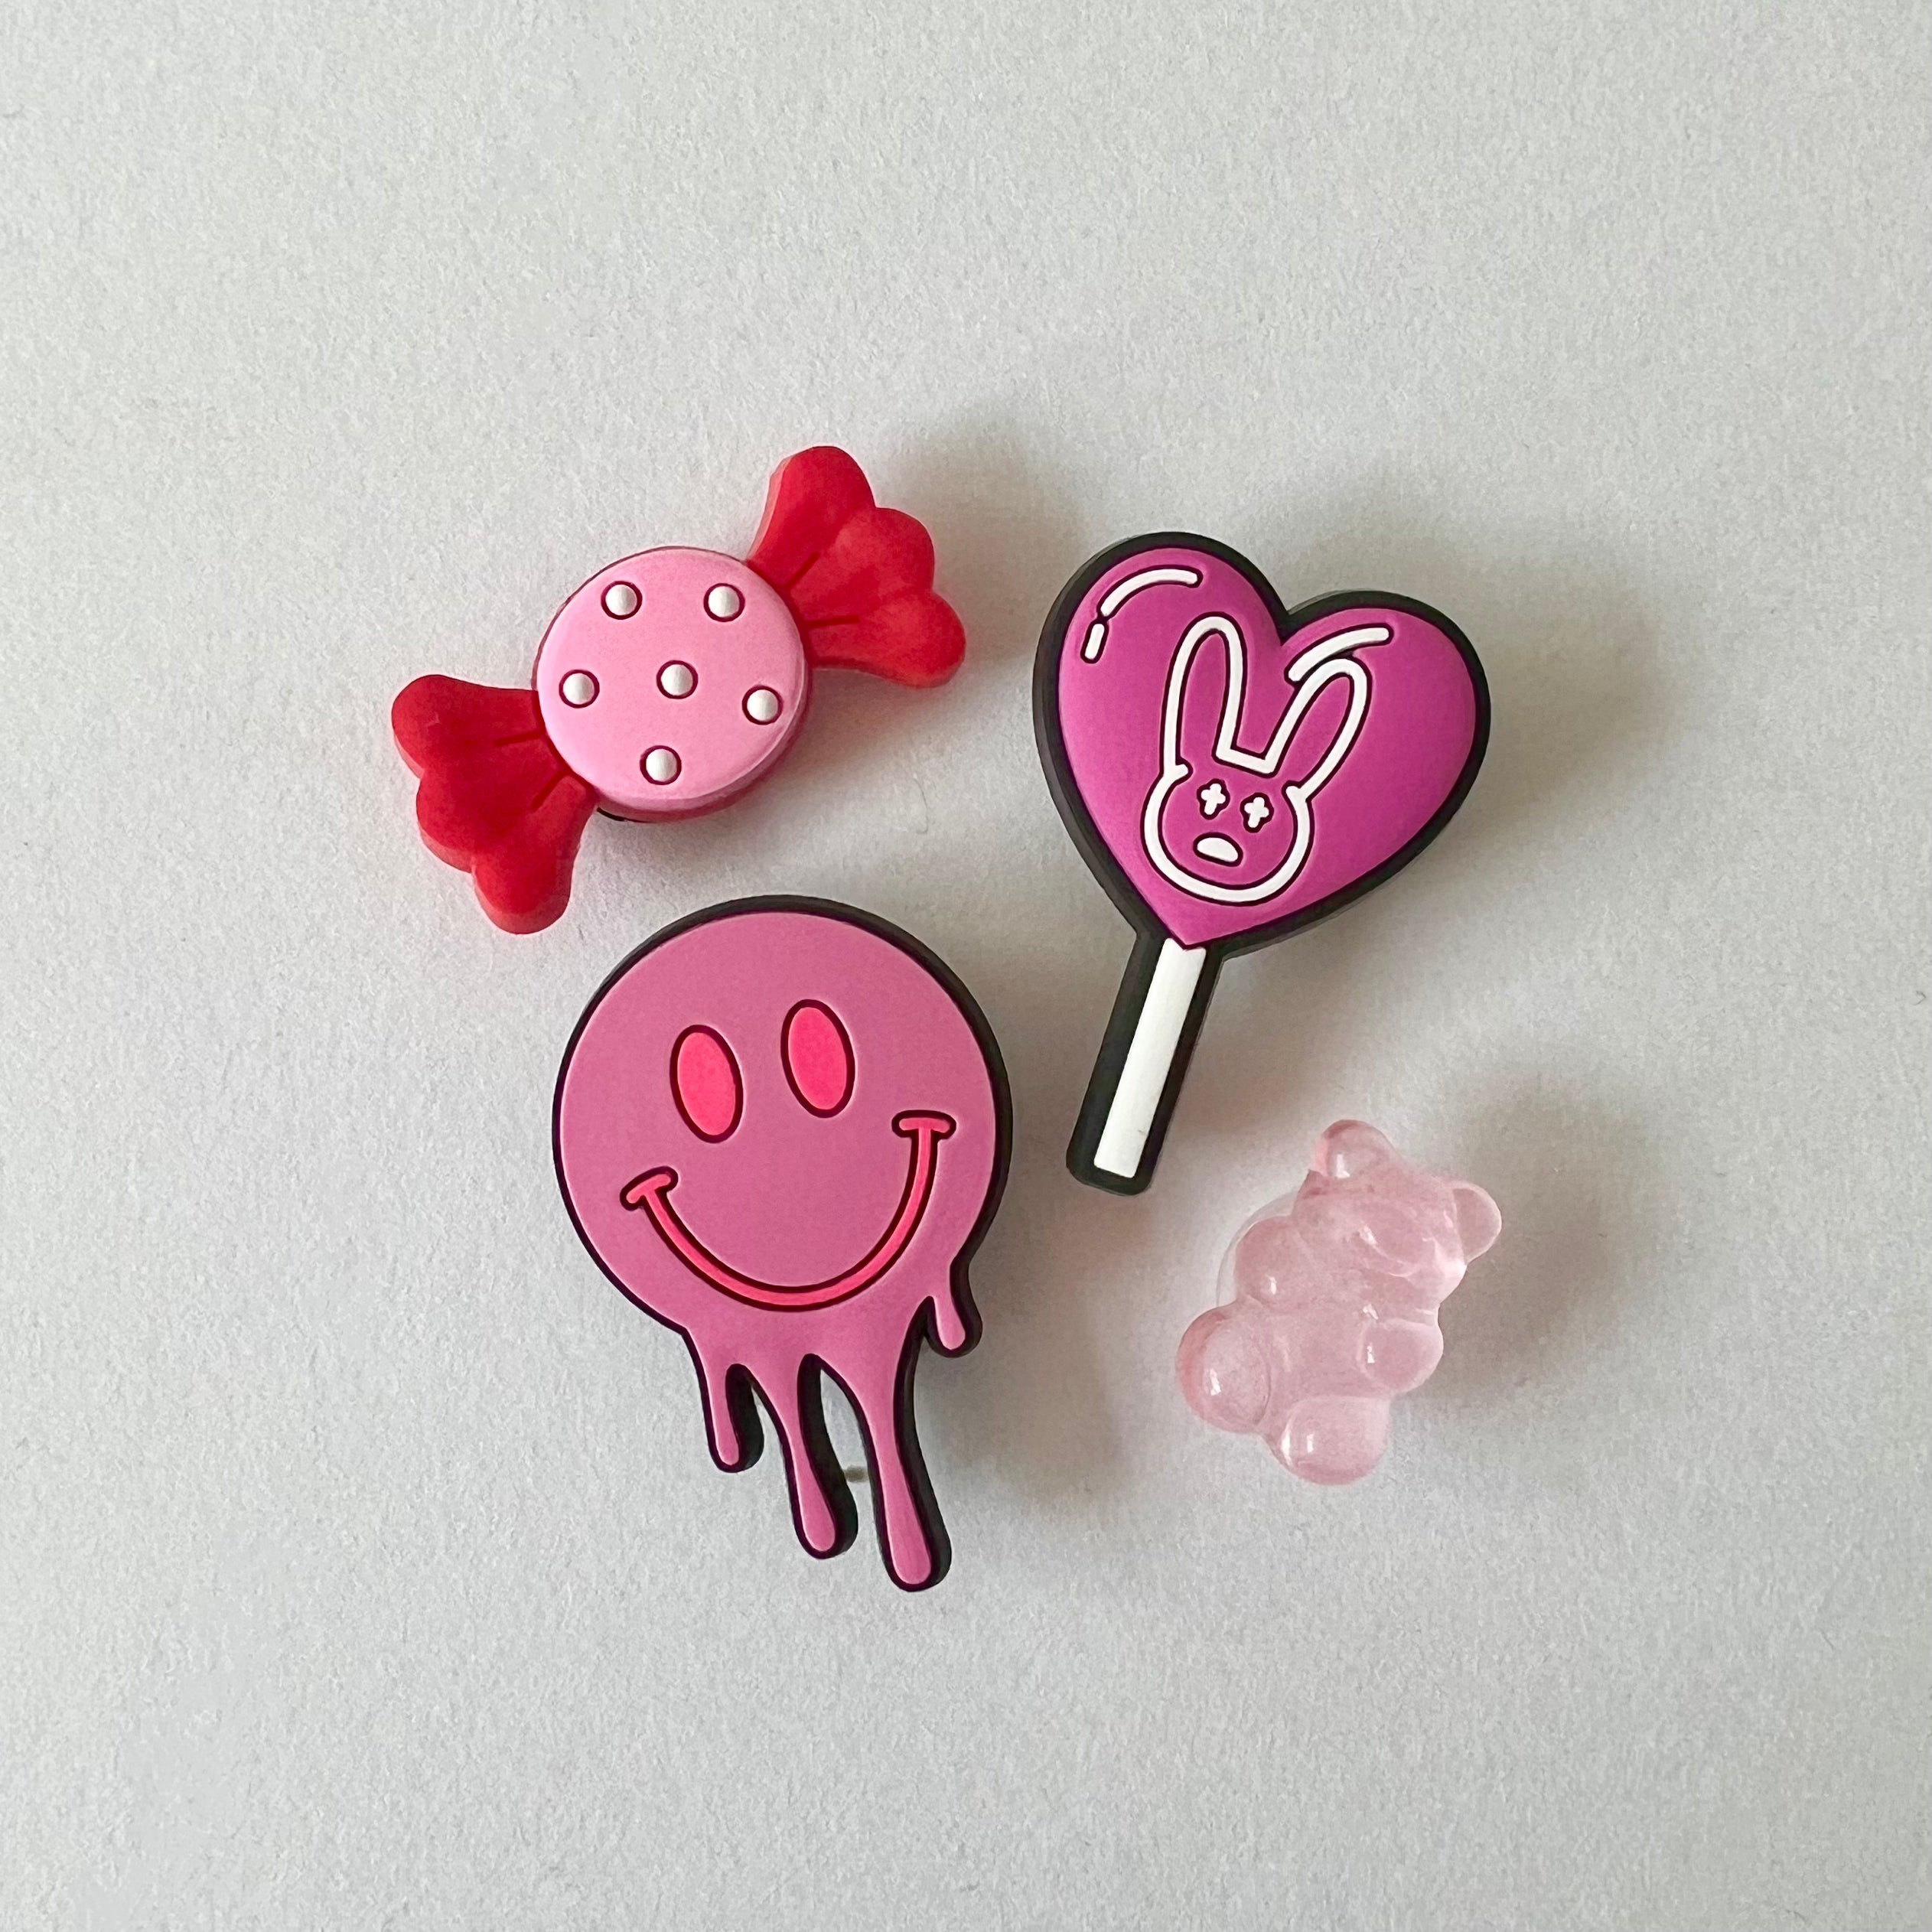 The Pink Candy Charms Pack